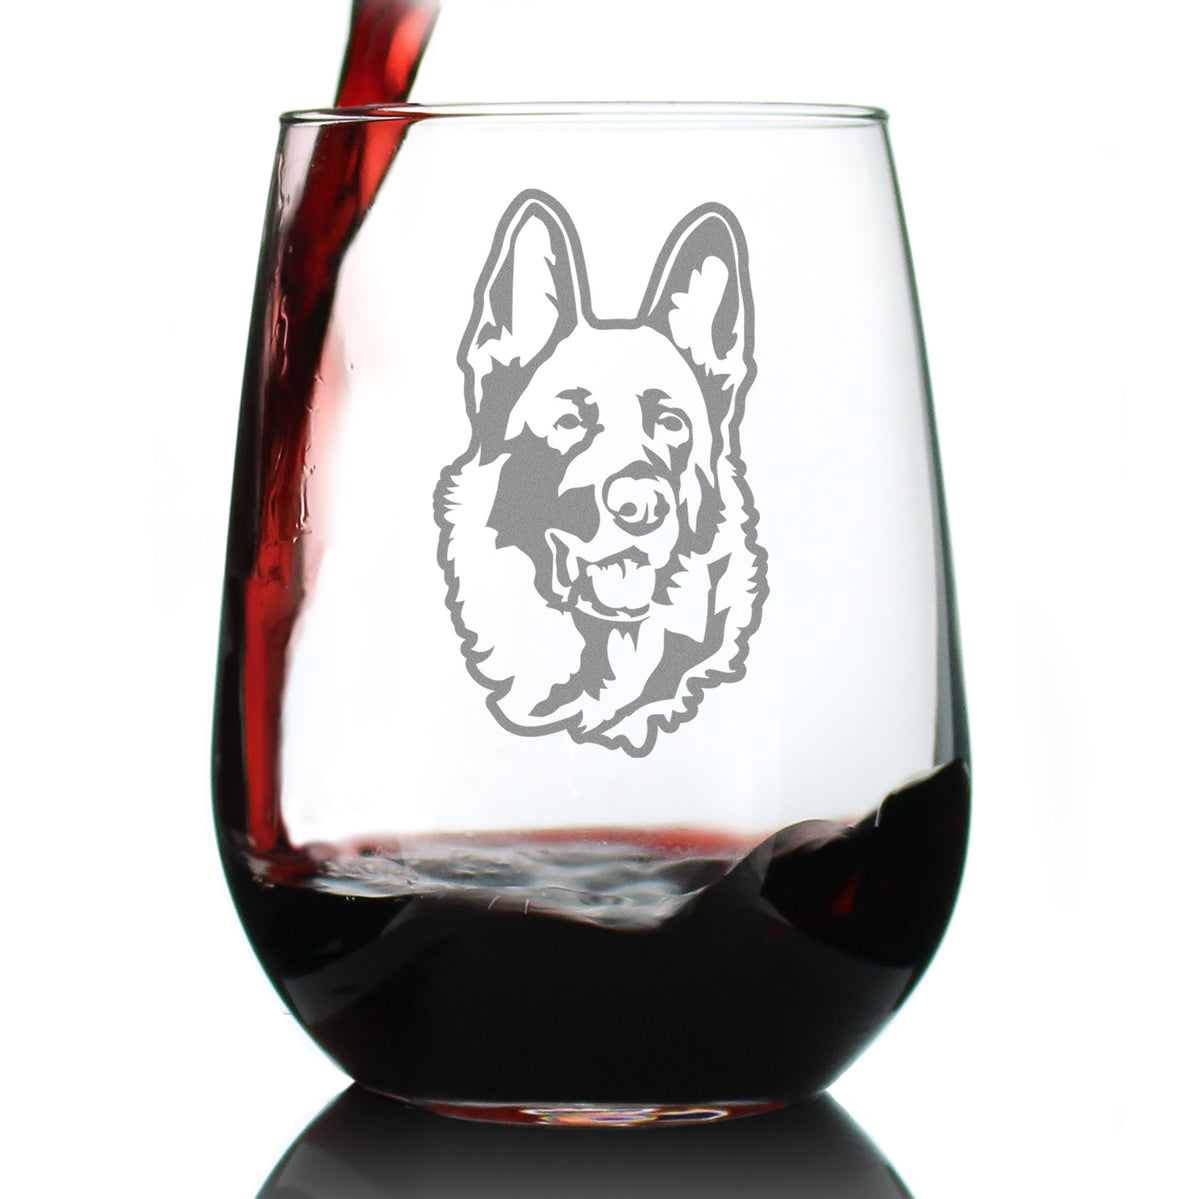 German Shepherd Happy Face Stemless Wine Glass - Cute Gifts for Dog Lovers with German Shepherds - Large Glasses